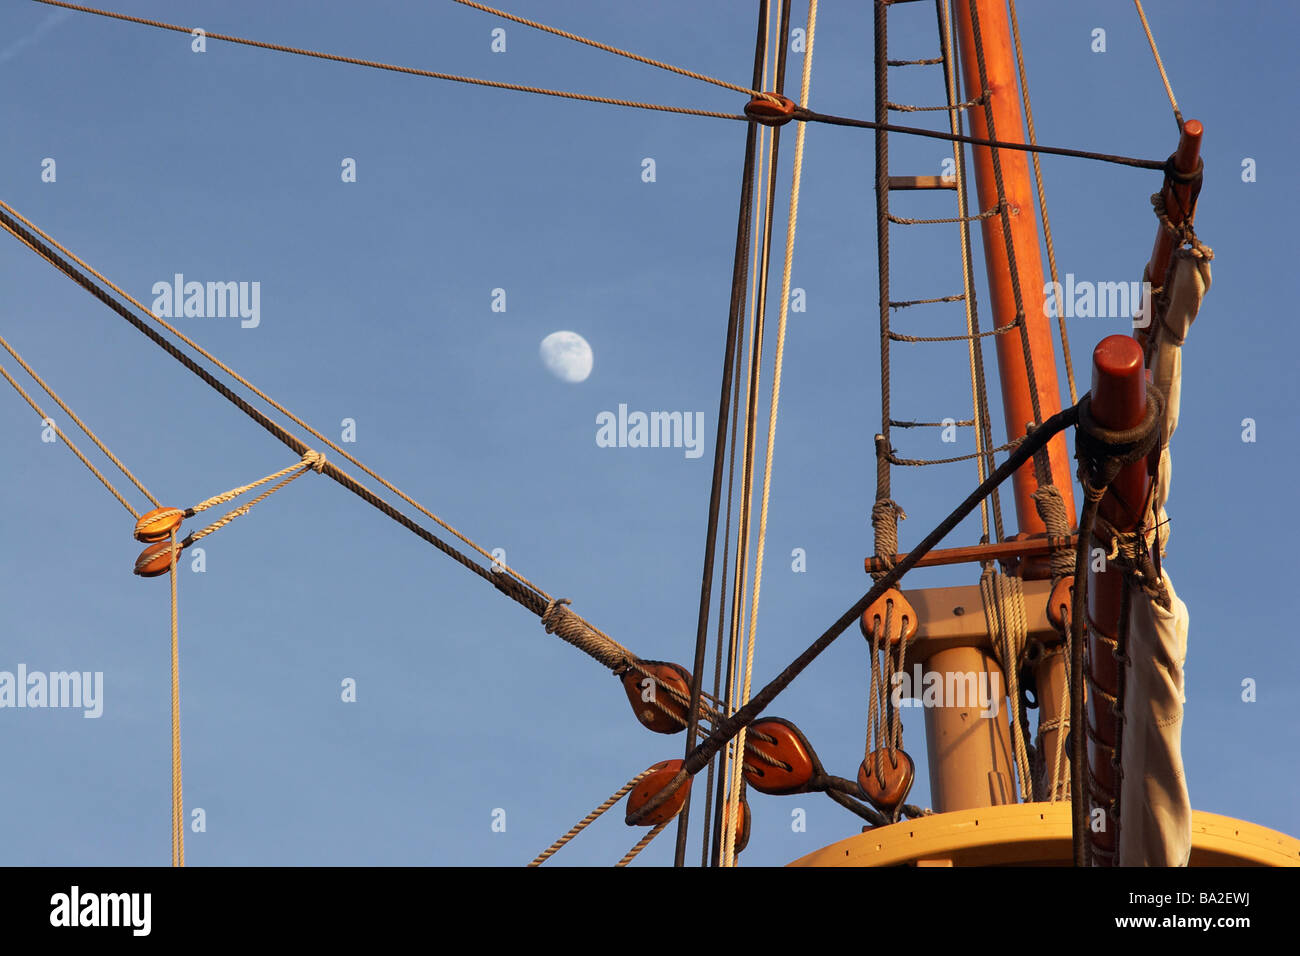 The moon visible between block and tackle rigging on a Jamestown Settlement ship Stock Photo